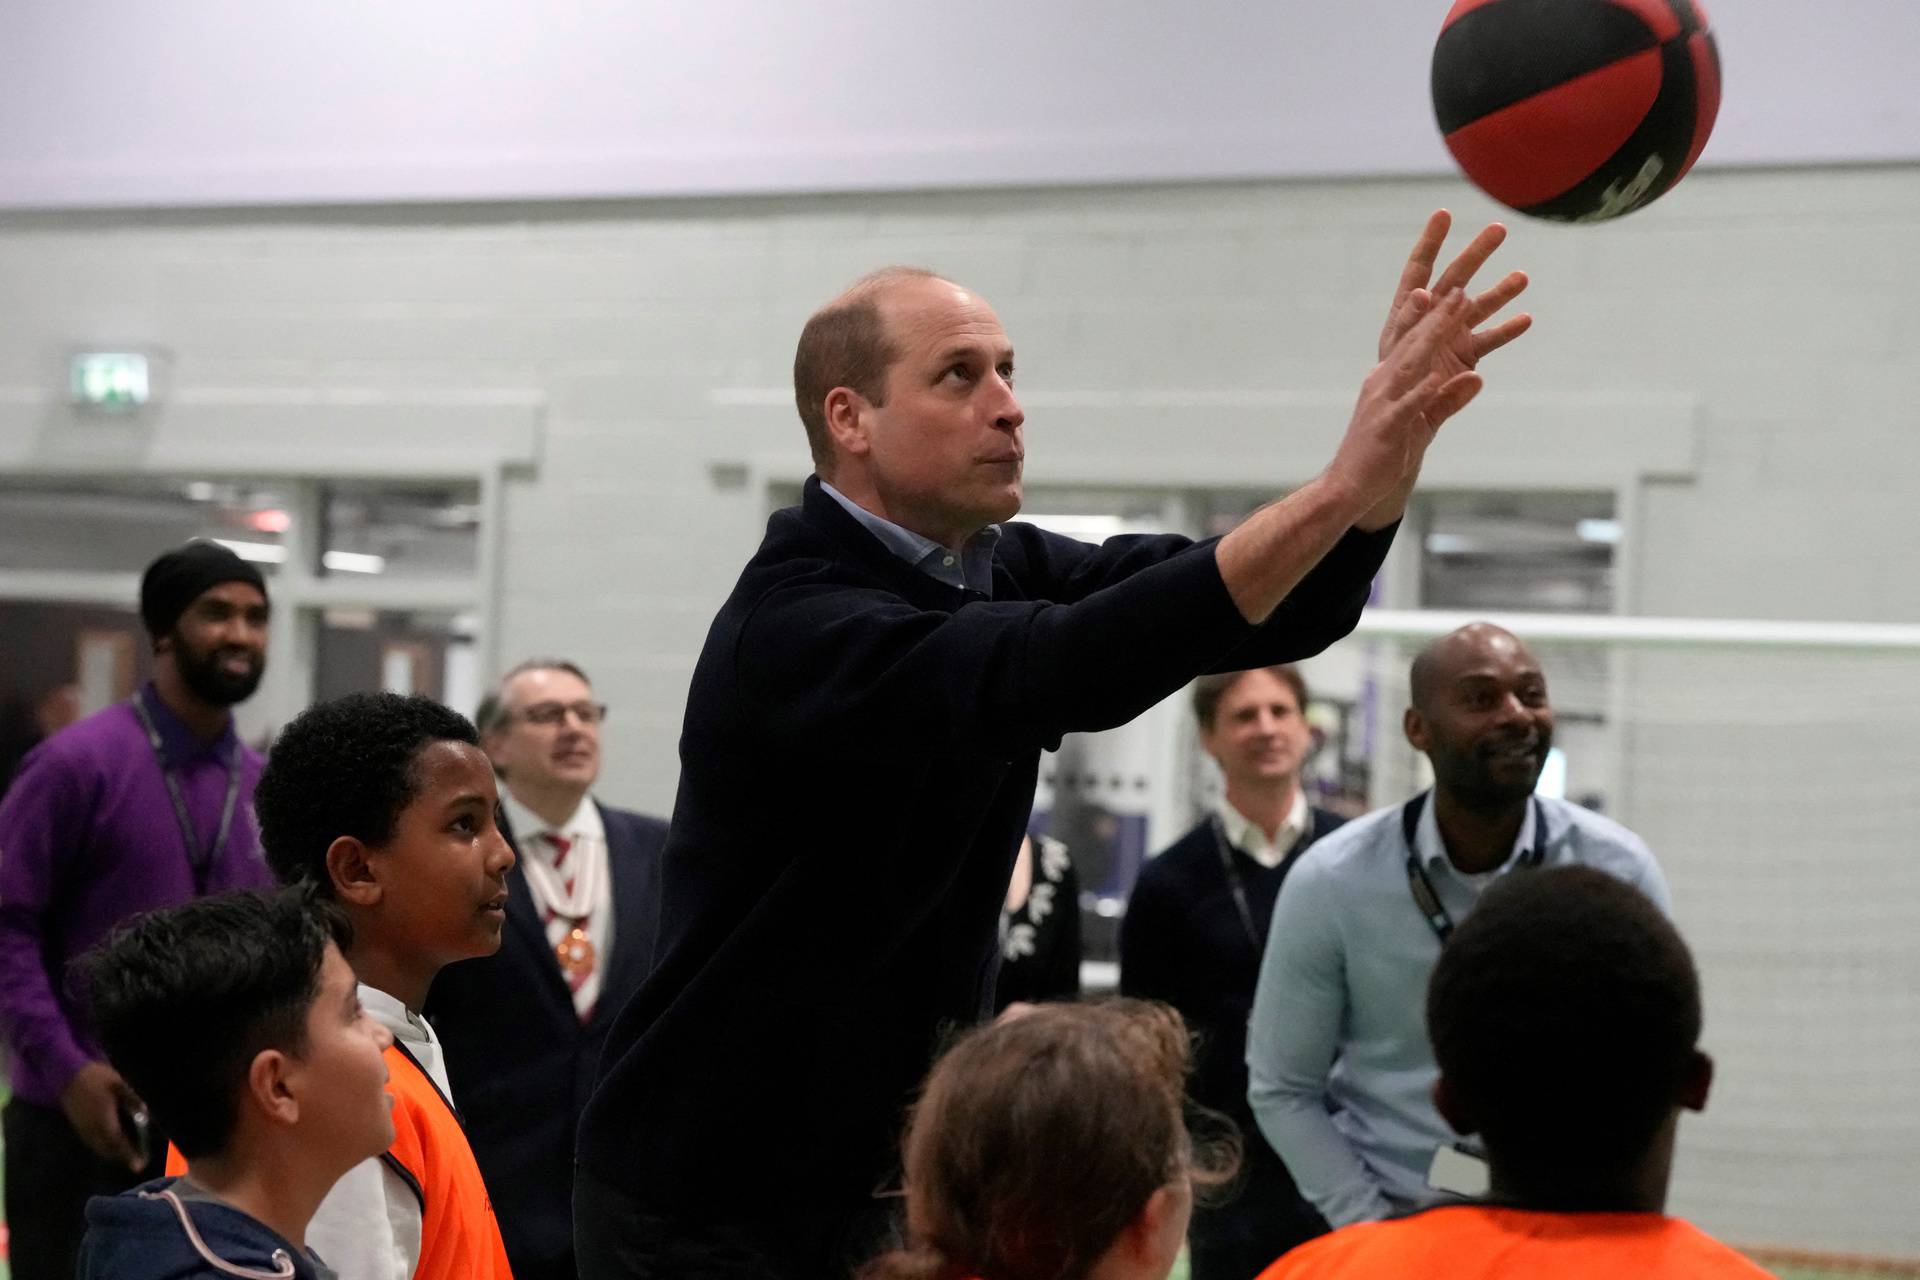 Prince William visits the new OnSide Youth Zone